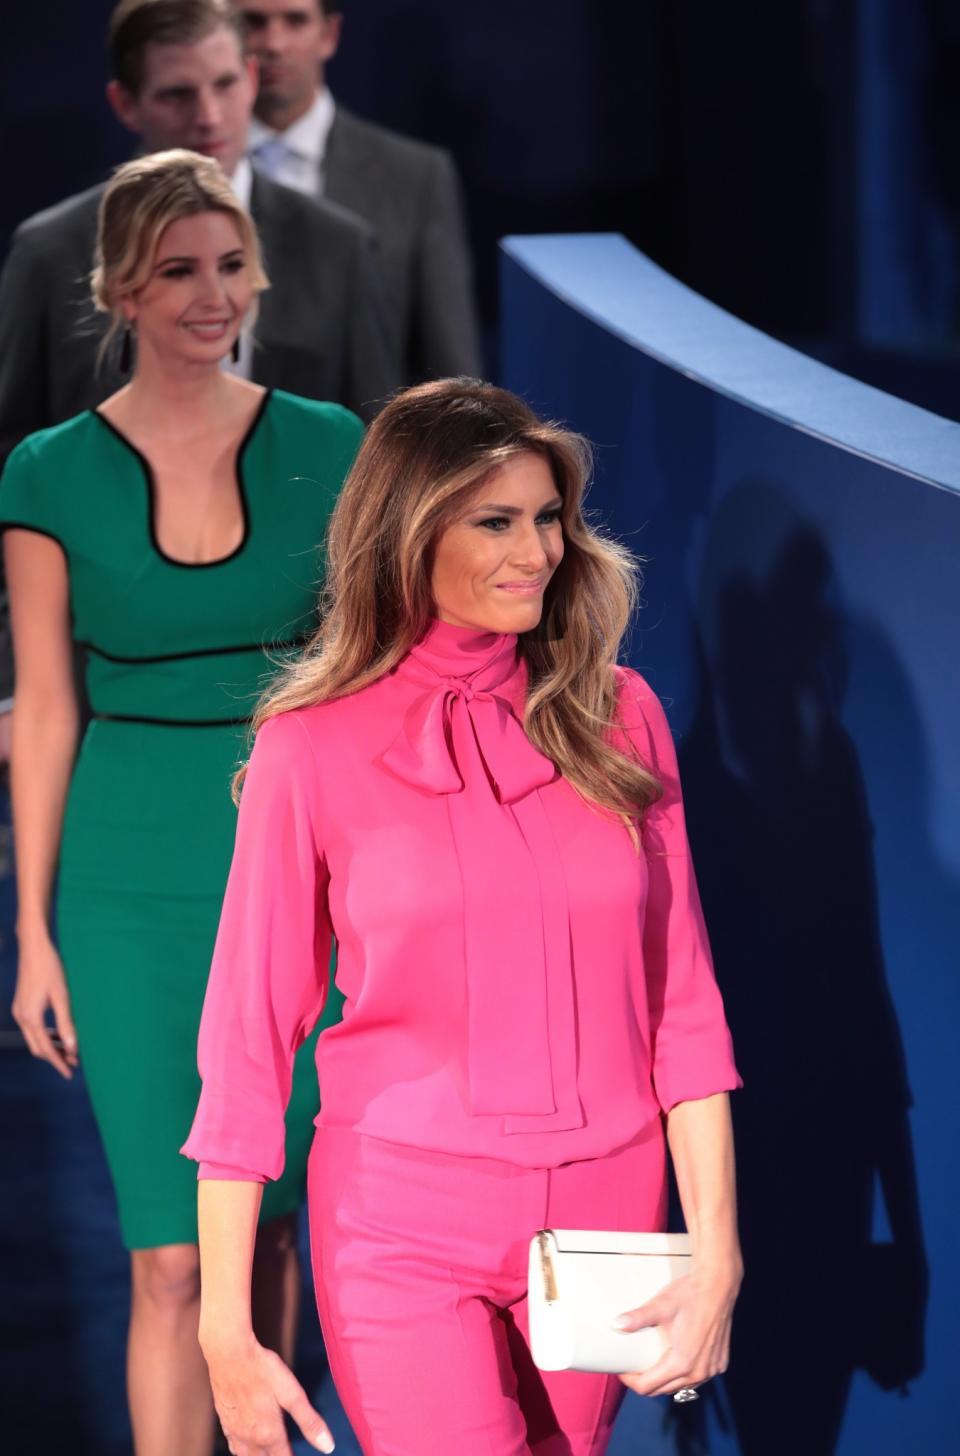 October: Melania Trump responds to her husband’s comments